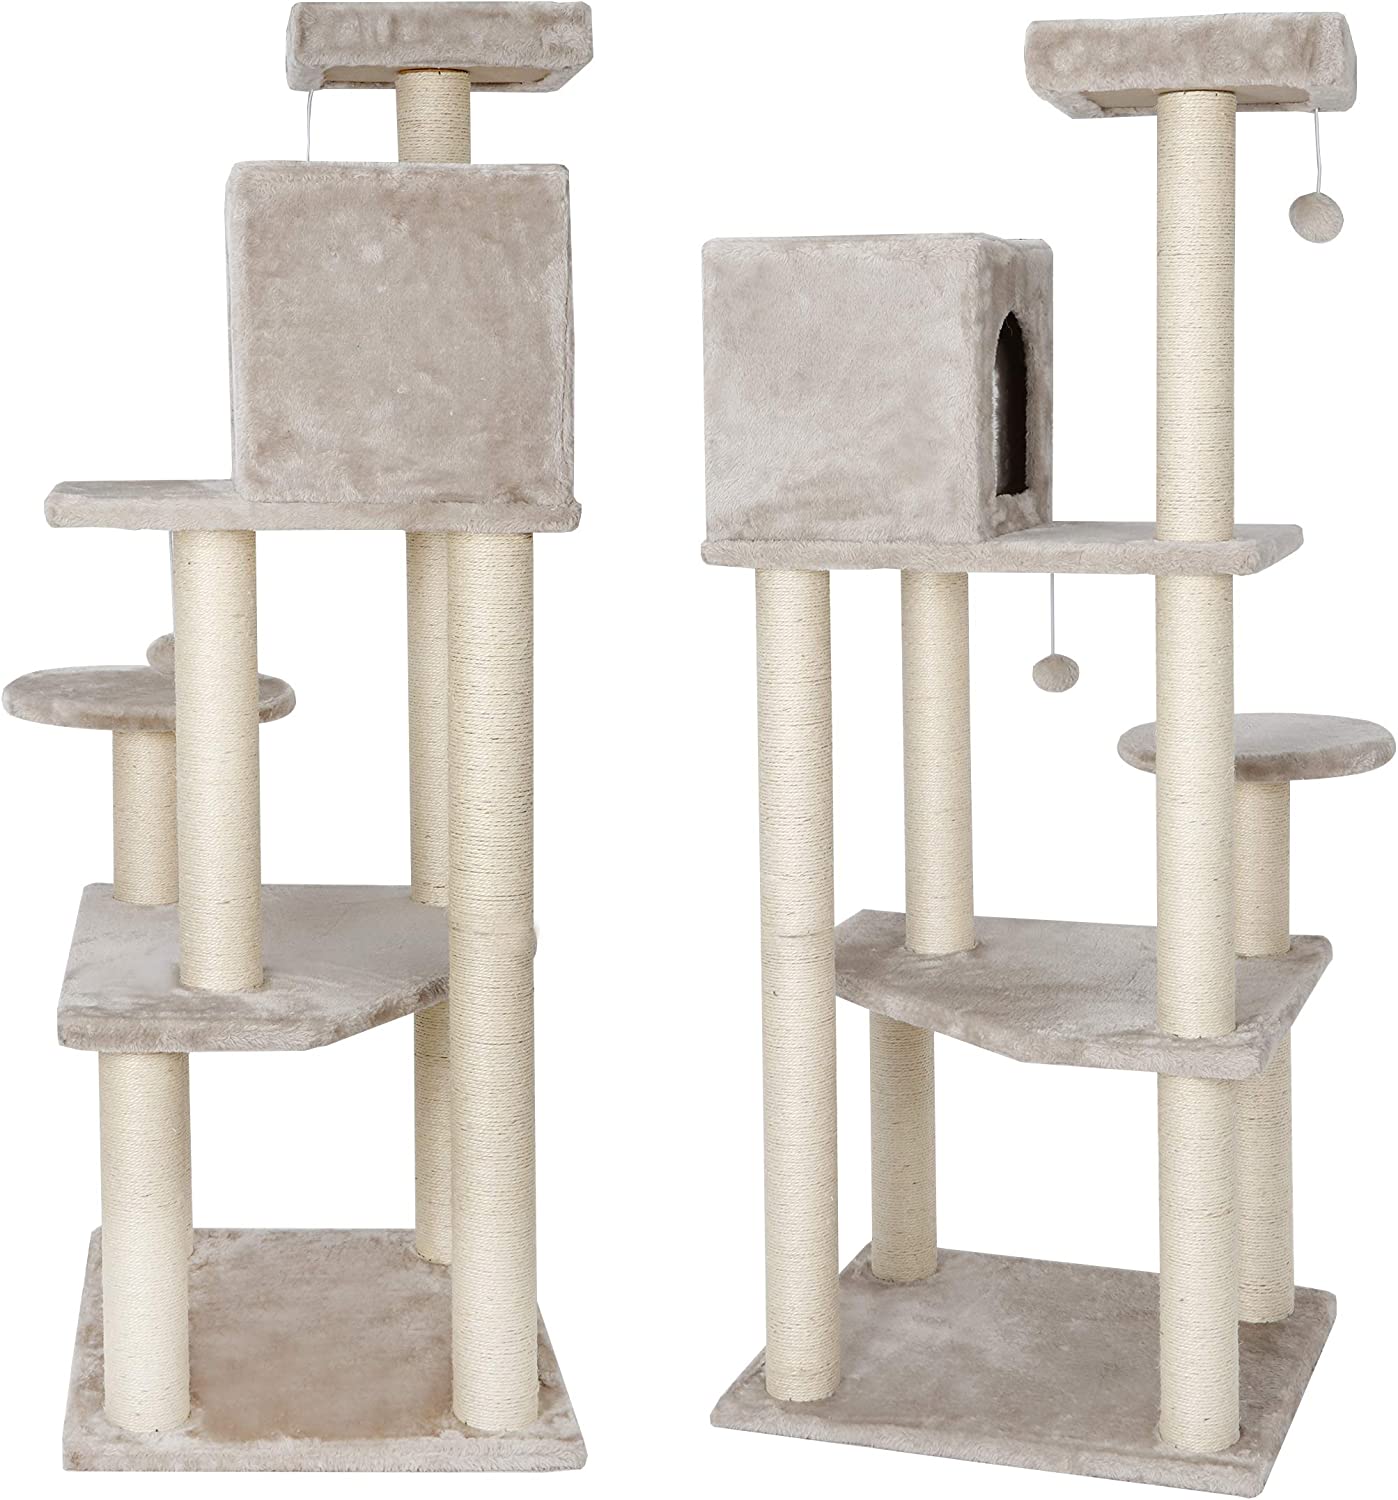 56in Cat Trees with Sisal Scratching Posts Perches and Condo, Cat Tower Furniture Kitty Activity Center Kitten Play House